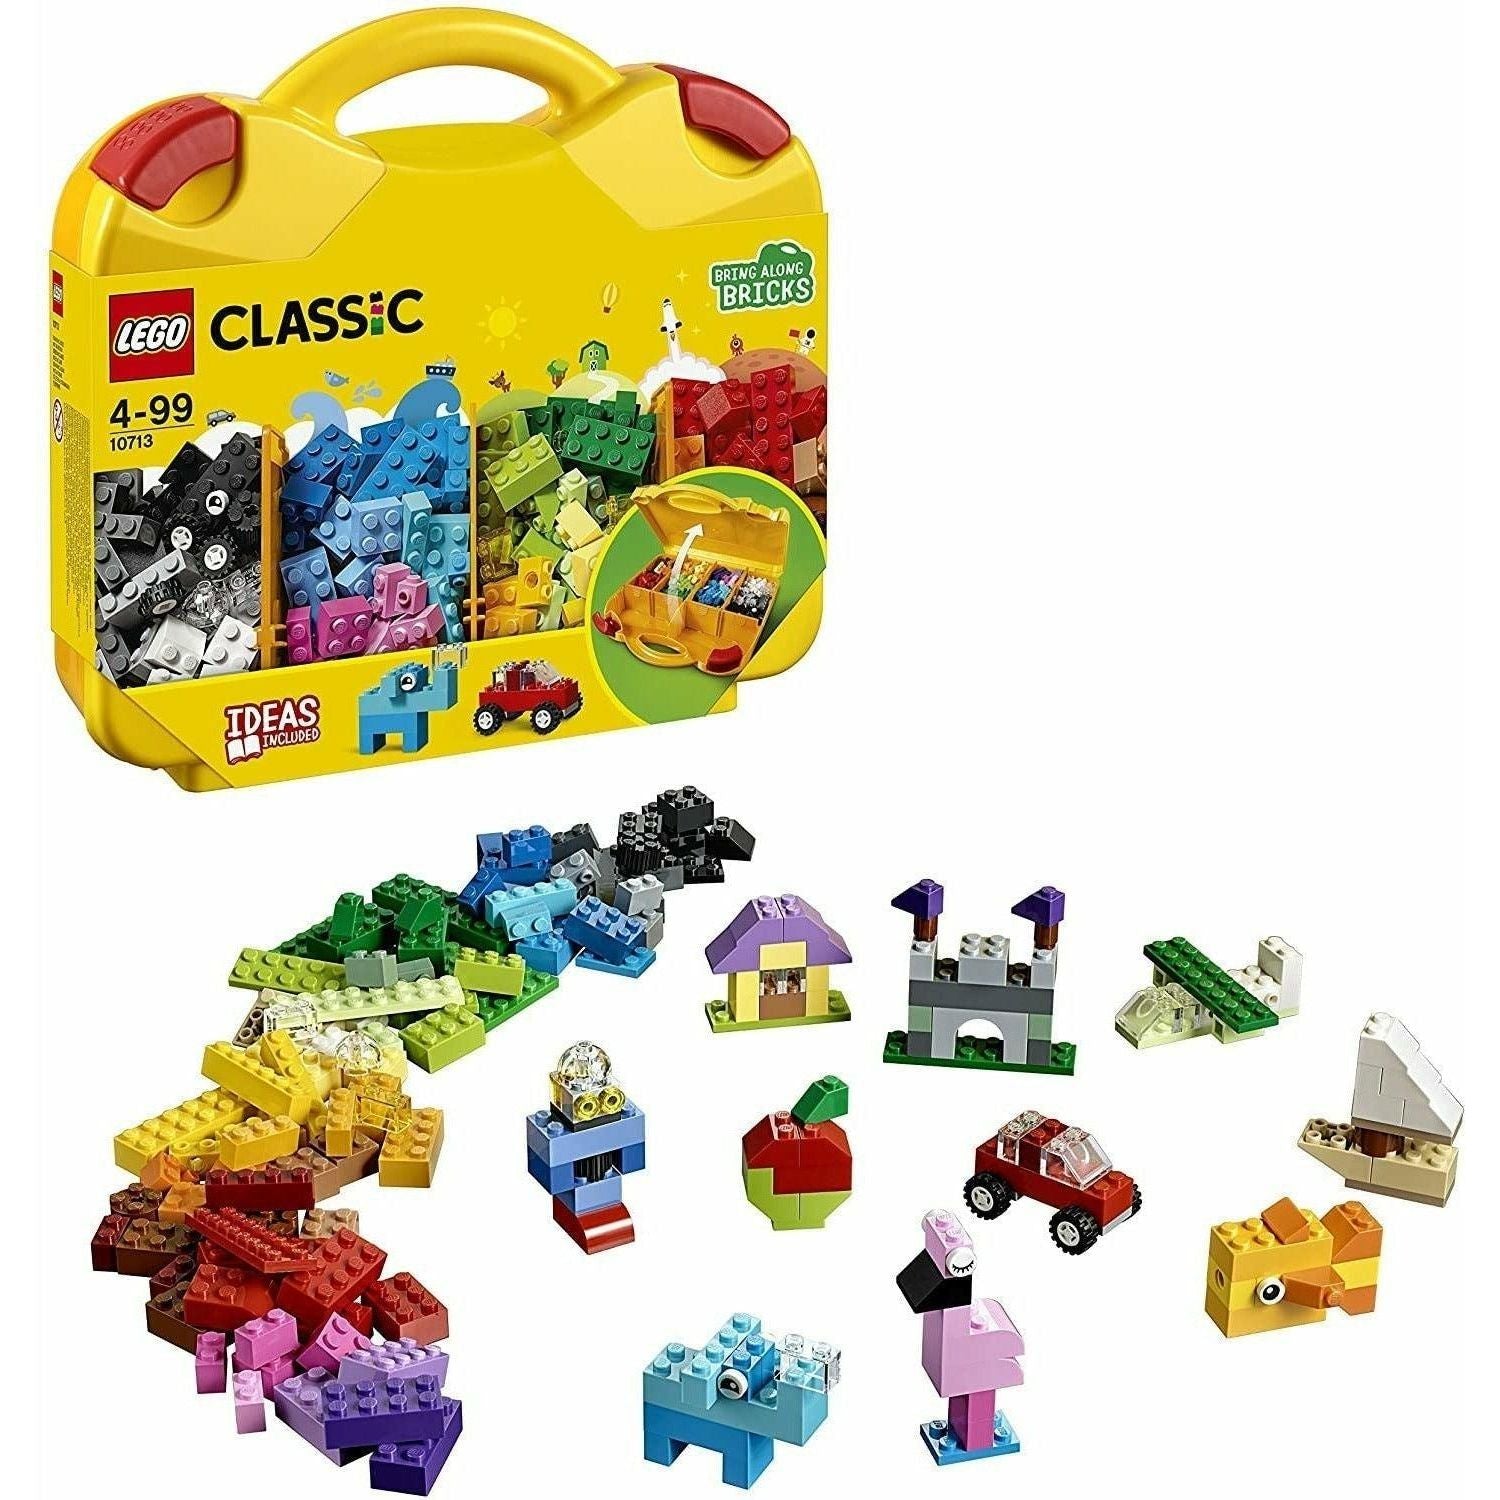 LEGO Classic Creative Suitcase 10713 - Includes Sorting Storage Organizer Case with Fun Colorful Building Bricks (213 Pieces) - BumbleToys - 4+ Years, Boys, Classic, LEGO, OXE, Pre-Order